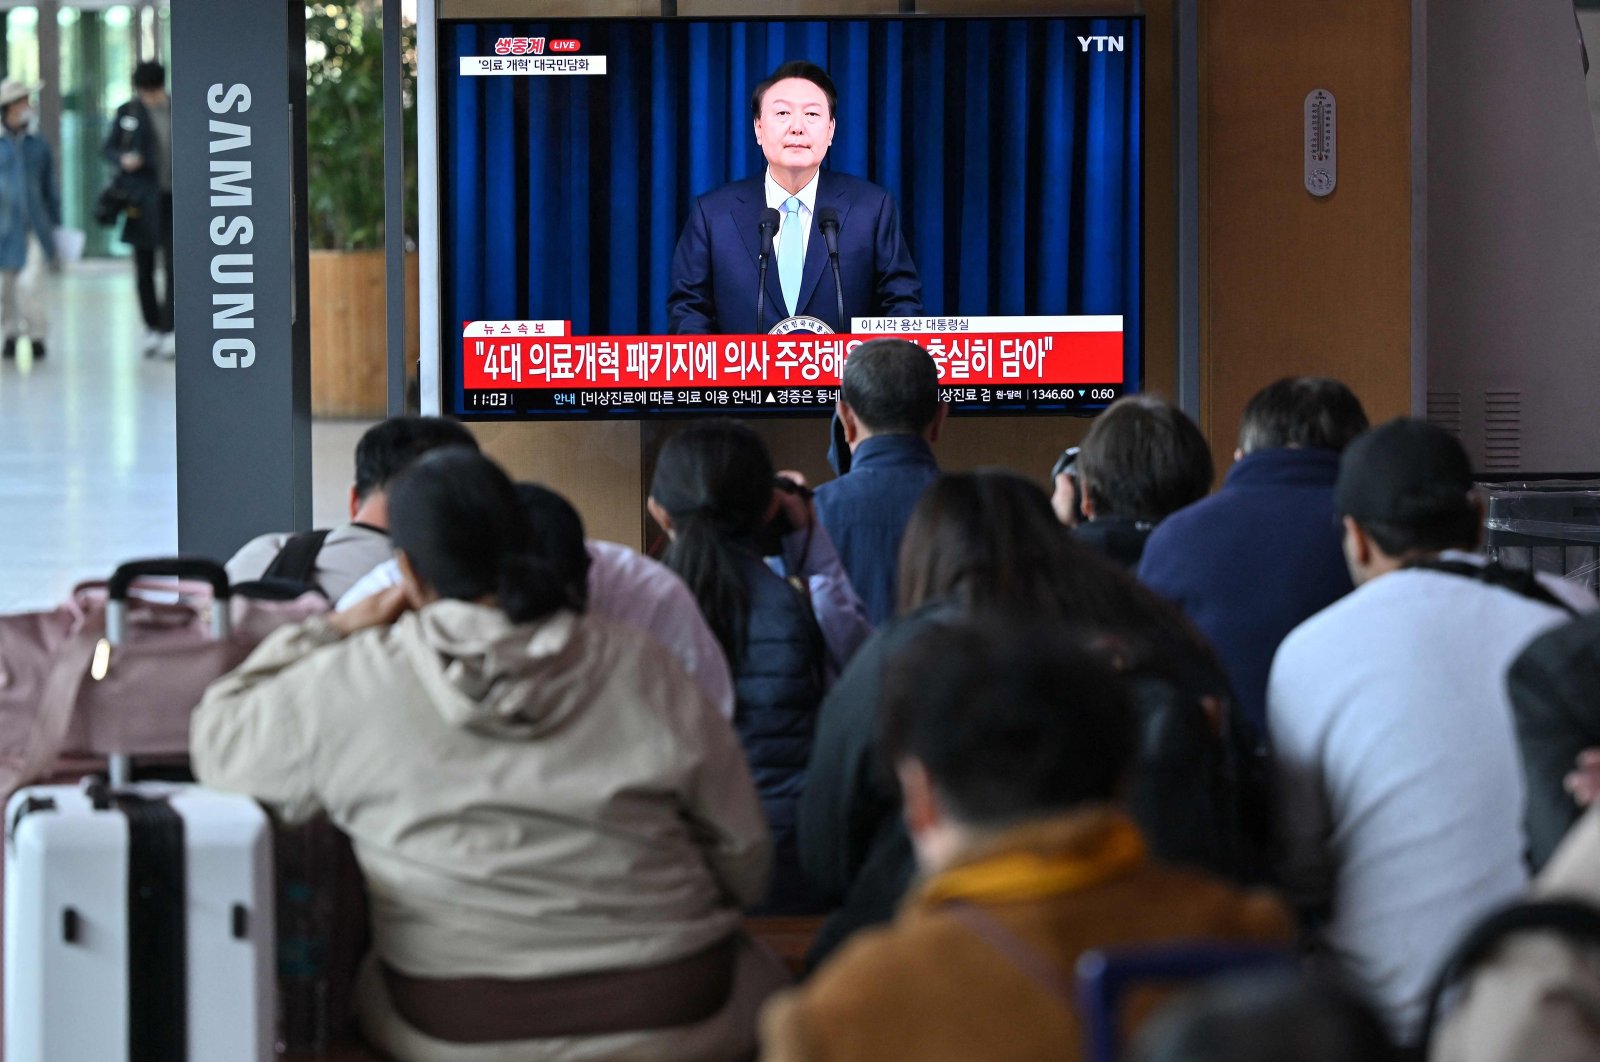 People watch a television news program broadcasting live footage of South Korean President Yoon Suk Yeol delivering a speech on his medical reform plans at a railway station in Seoul, South Korea, April 1, 2024. (AFP Photo)